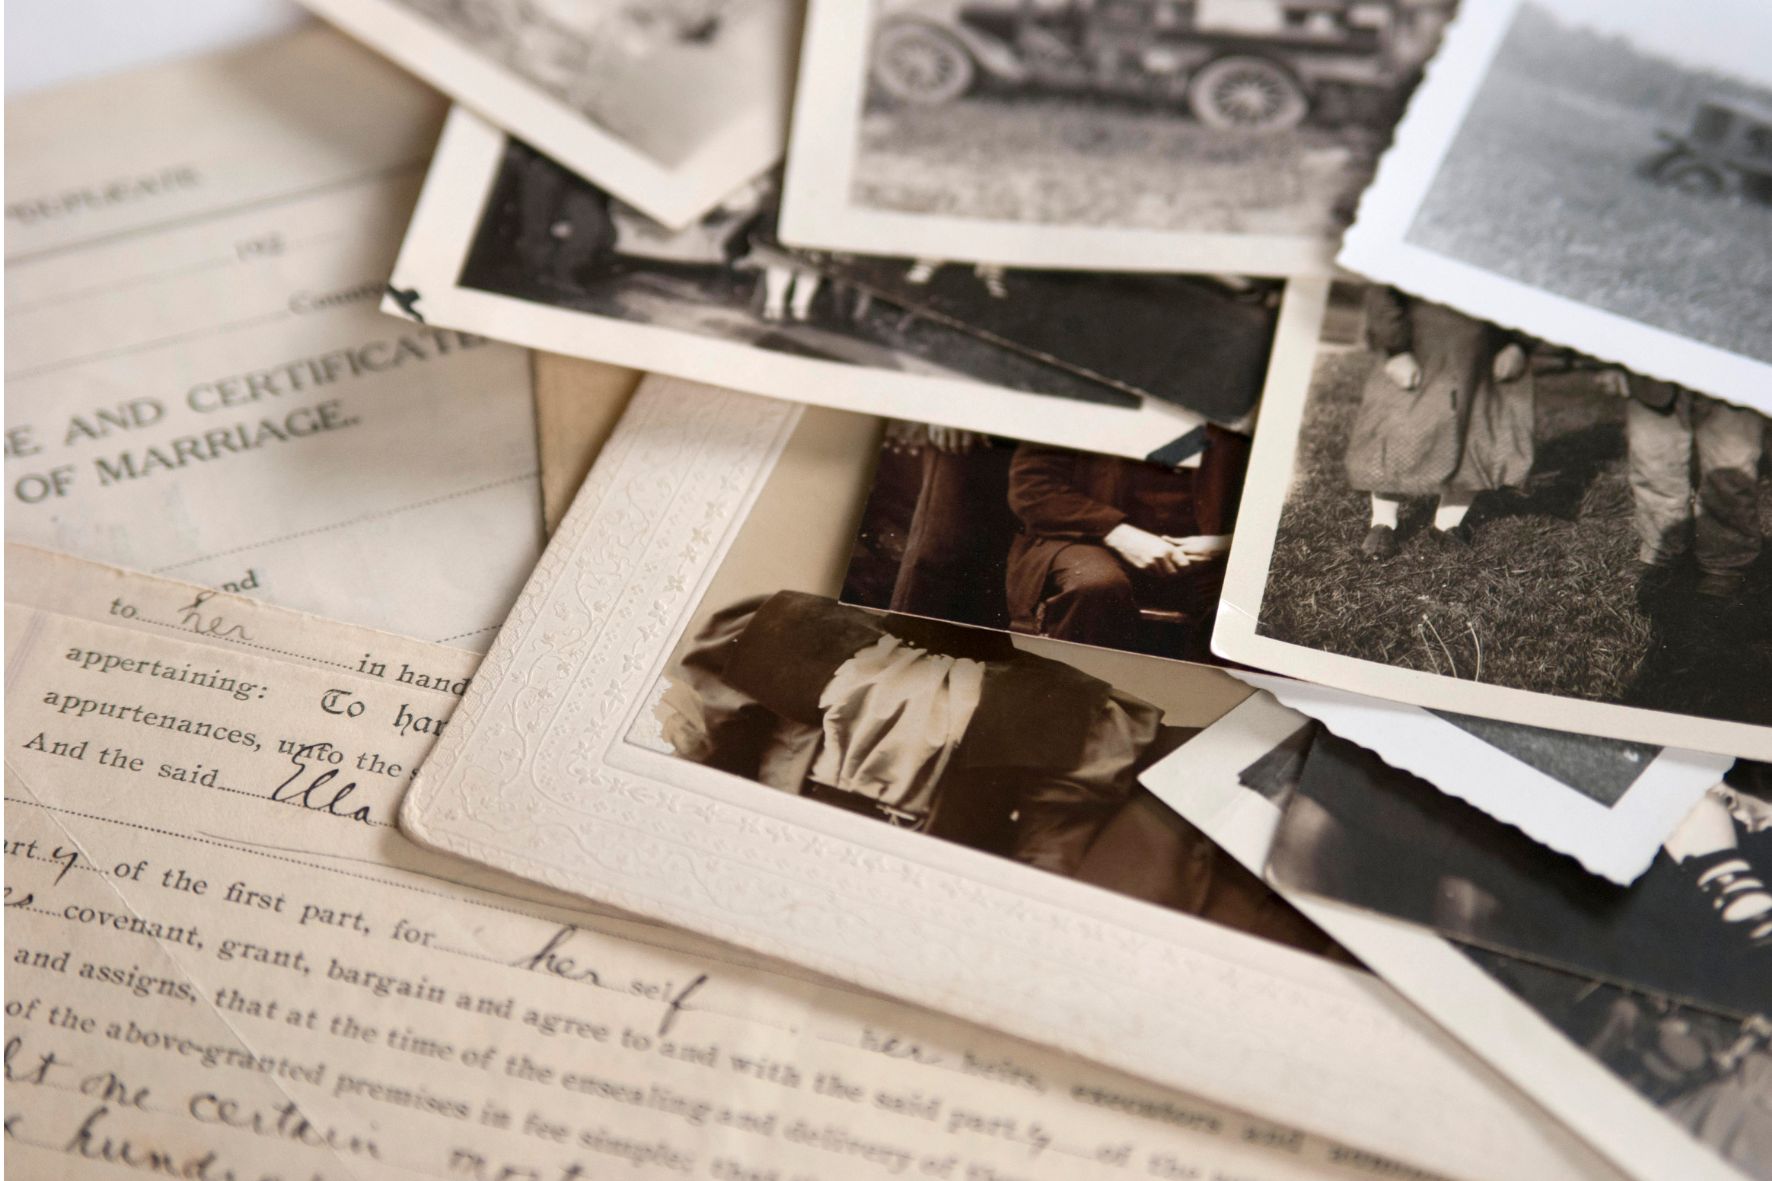 Discover your Family History